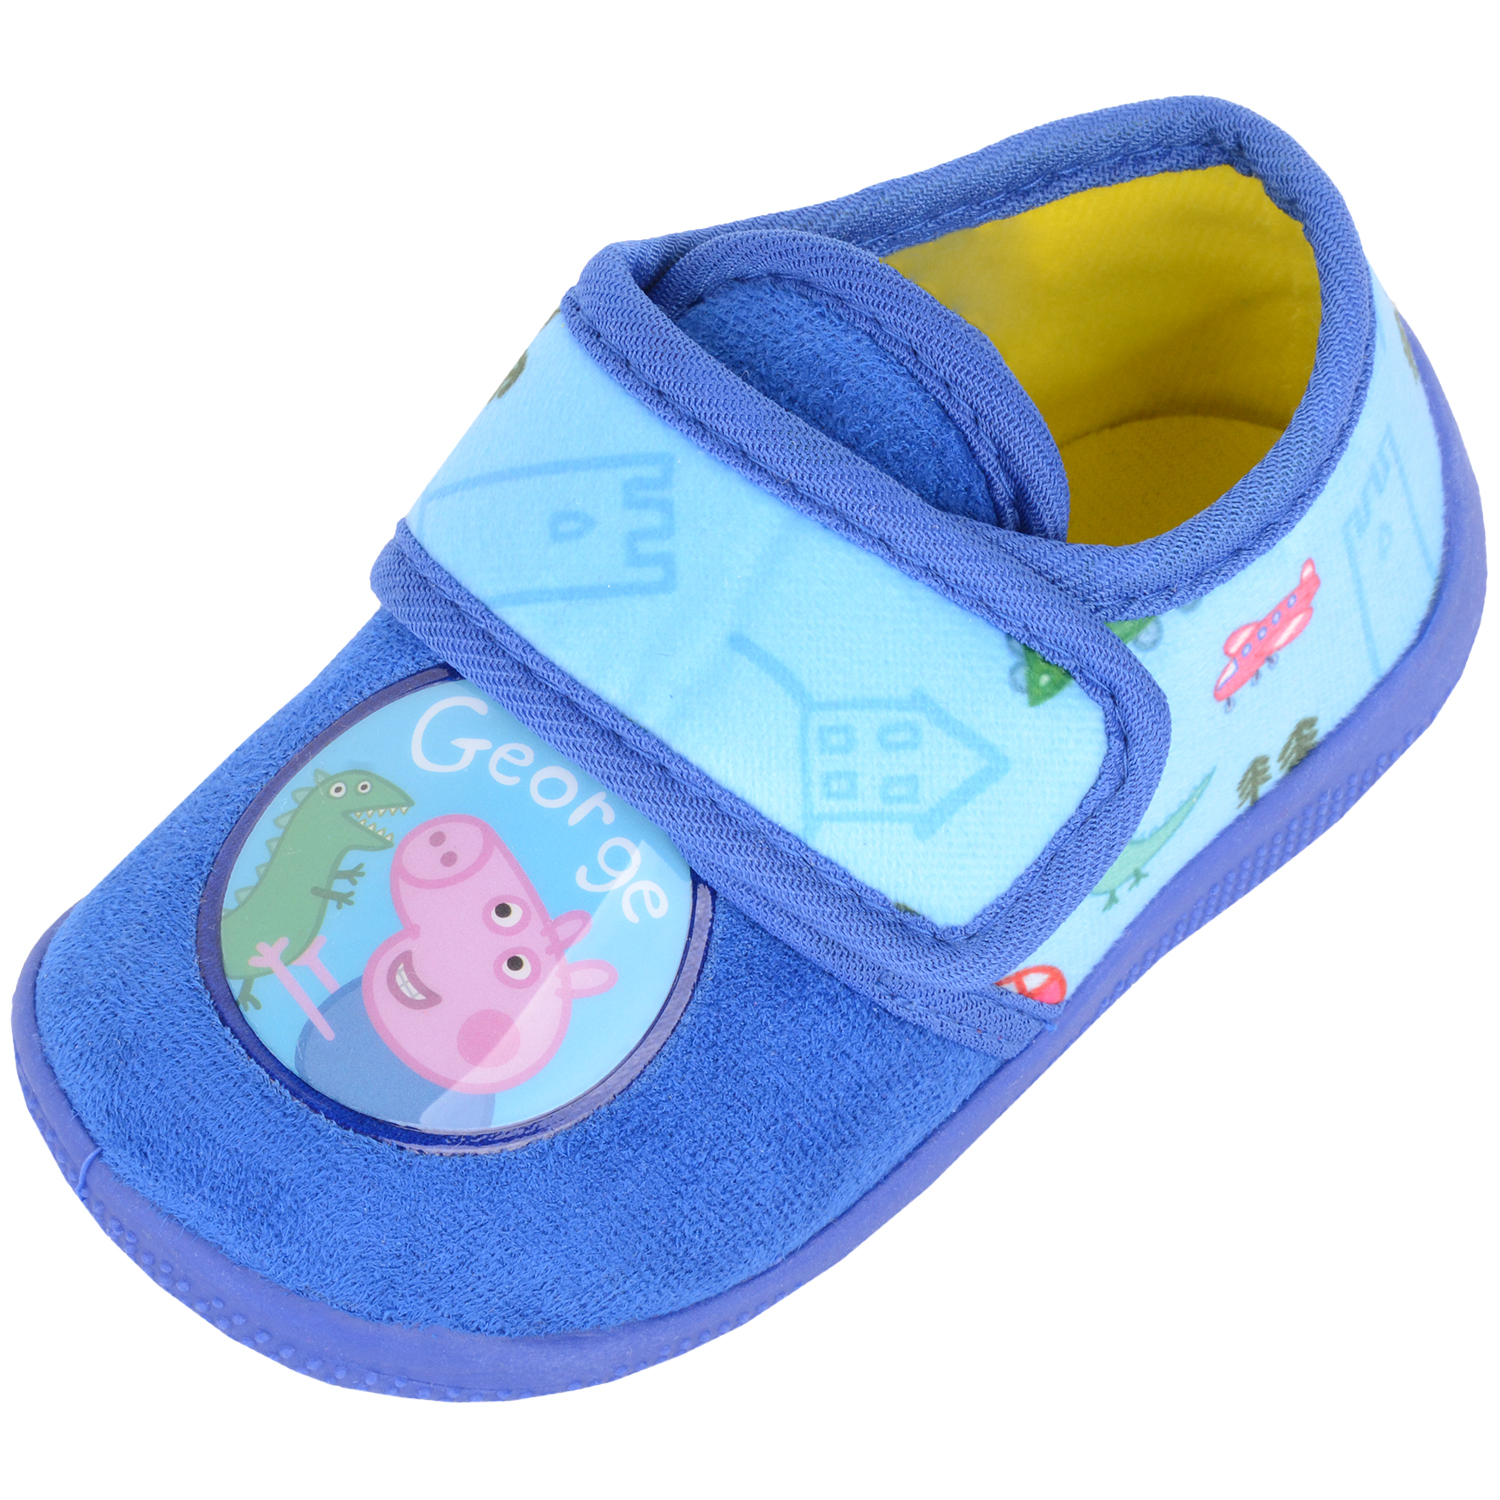 Kids Shoes House Slippers Bedroom Home Slippers Cartoon Cow Cotton Slippers  Winter Indoor Outdoor Slippers For Boys Girls Toddler Princess Slippers  (Black, 2.5-3 Years Toddler) : Amazon.co.uk: Fashion